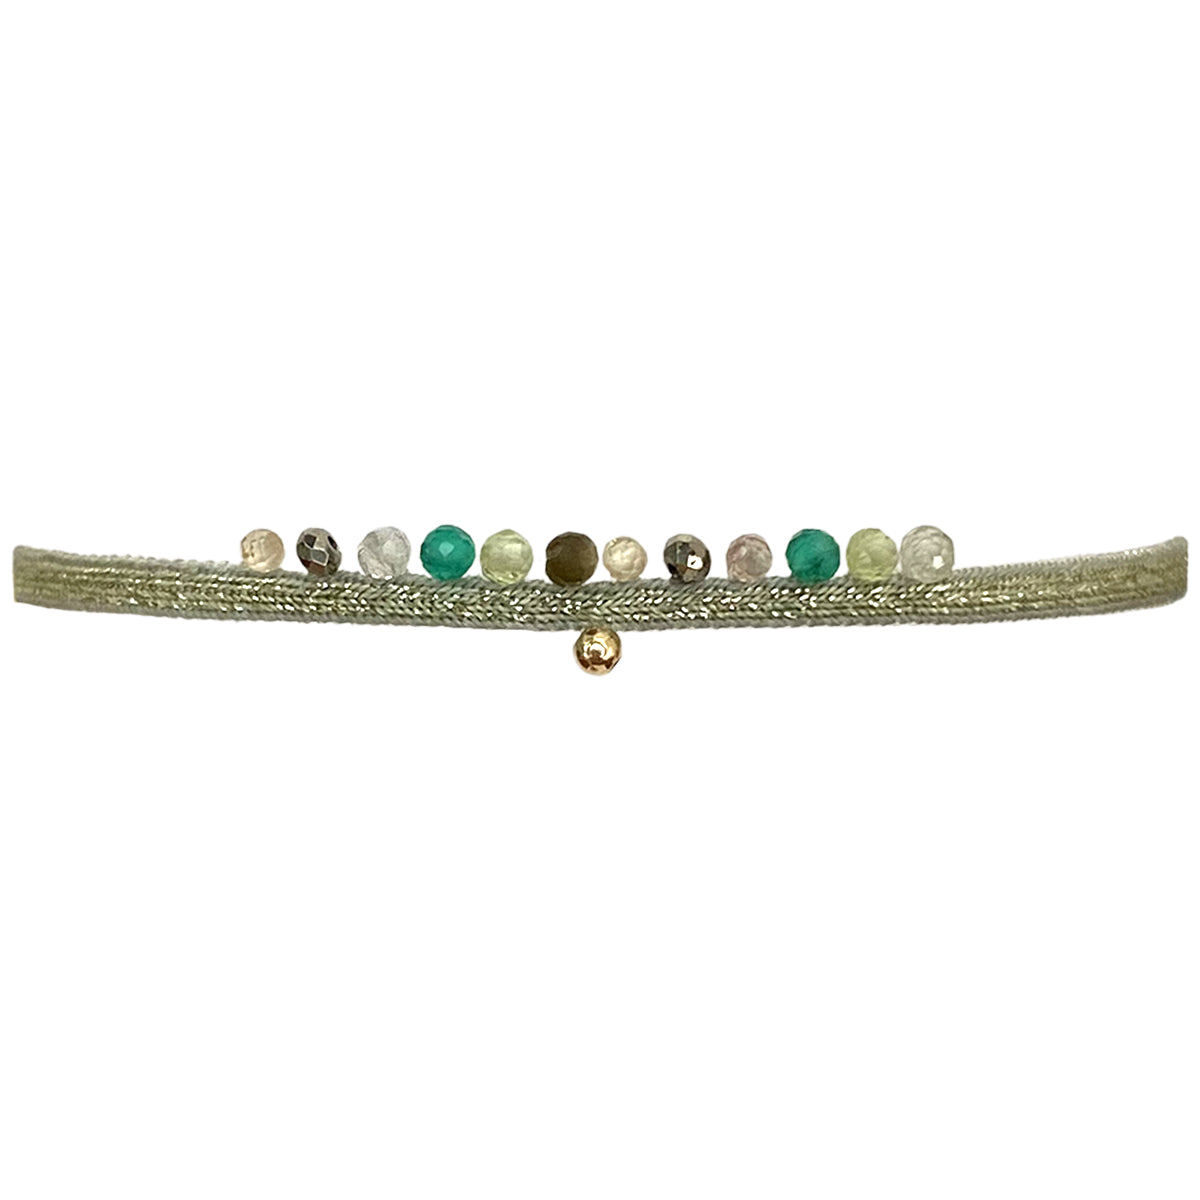 HANDMADE PEACOCK BRACELET IN GREEN TONES FEATURING GEMSTONES DETAIL AND A GOLD BEAD